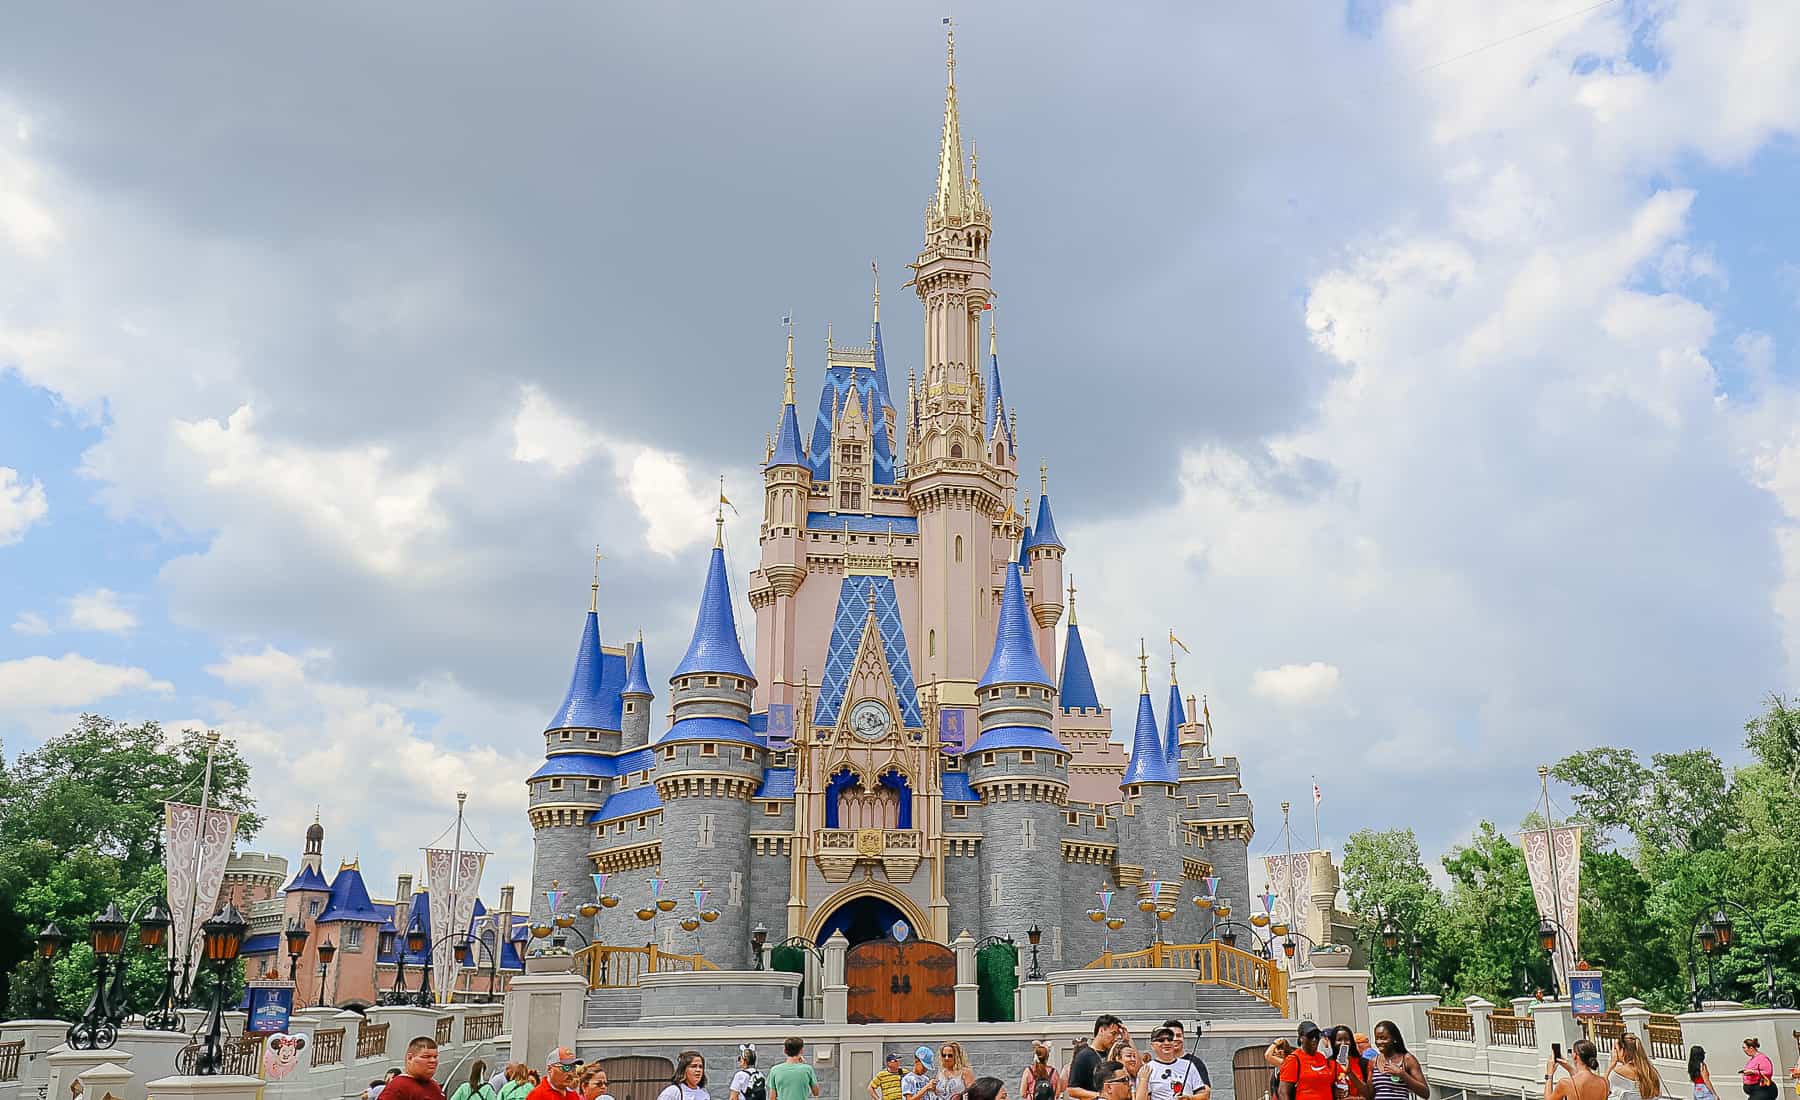 A Walk Around Cinderella Castle at Magic Kingdom (Photos and Things to Do)